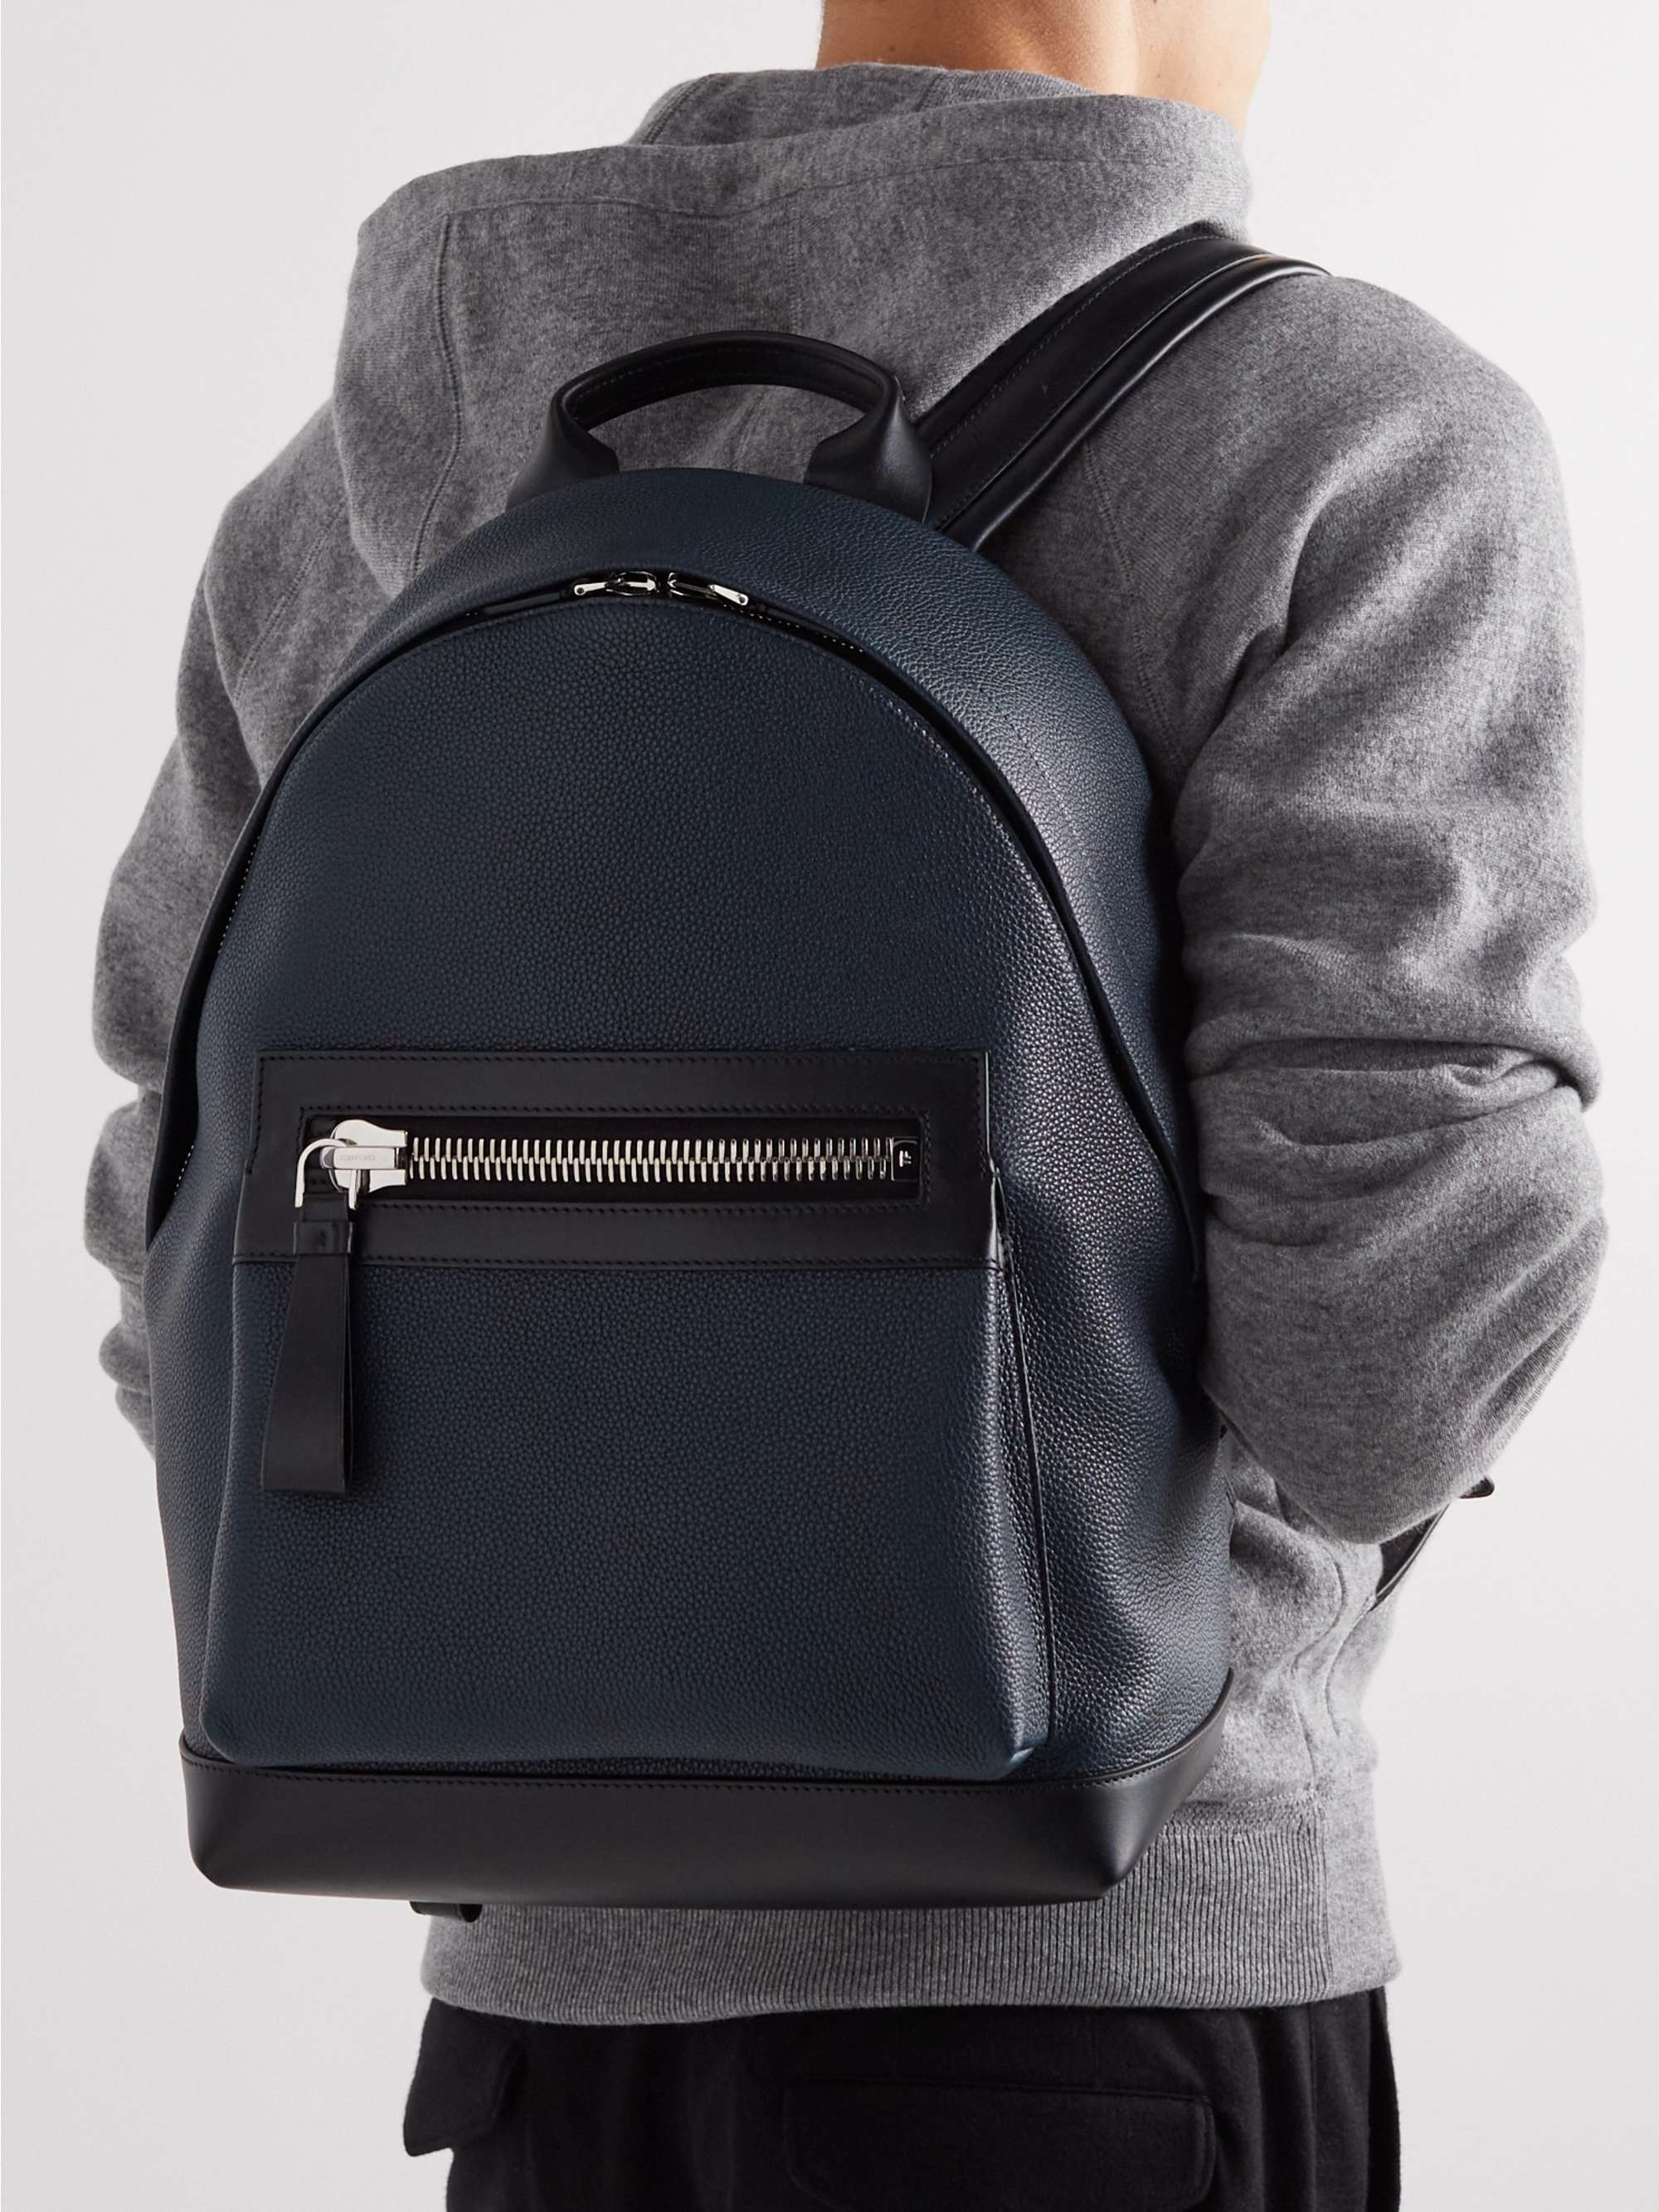 TOM FORD Buckley Pebble-Grain Leather Backpack